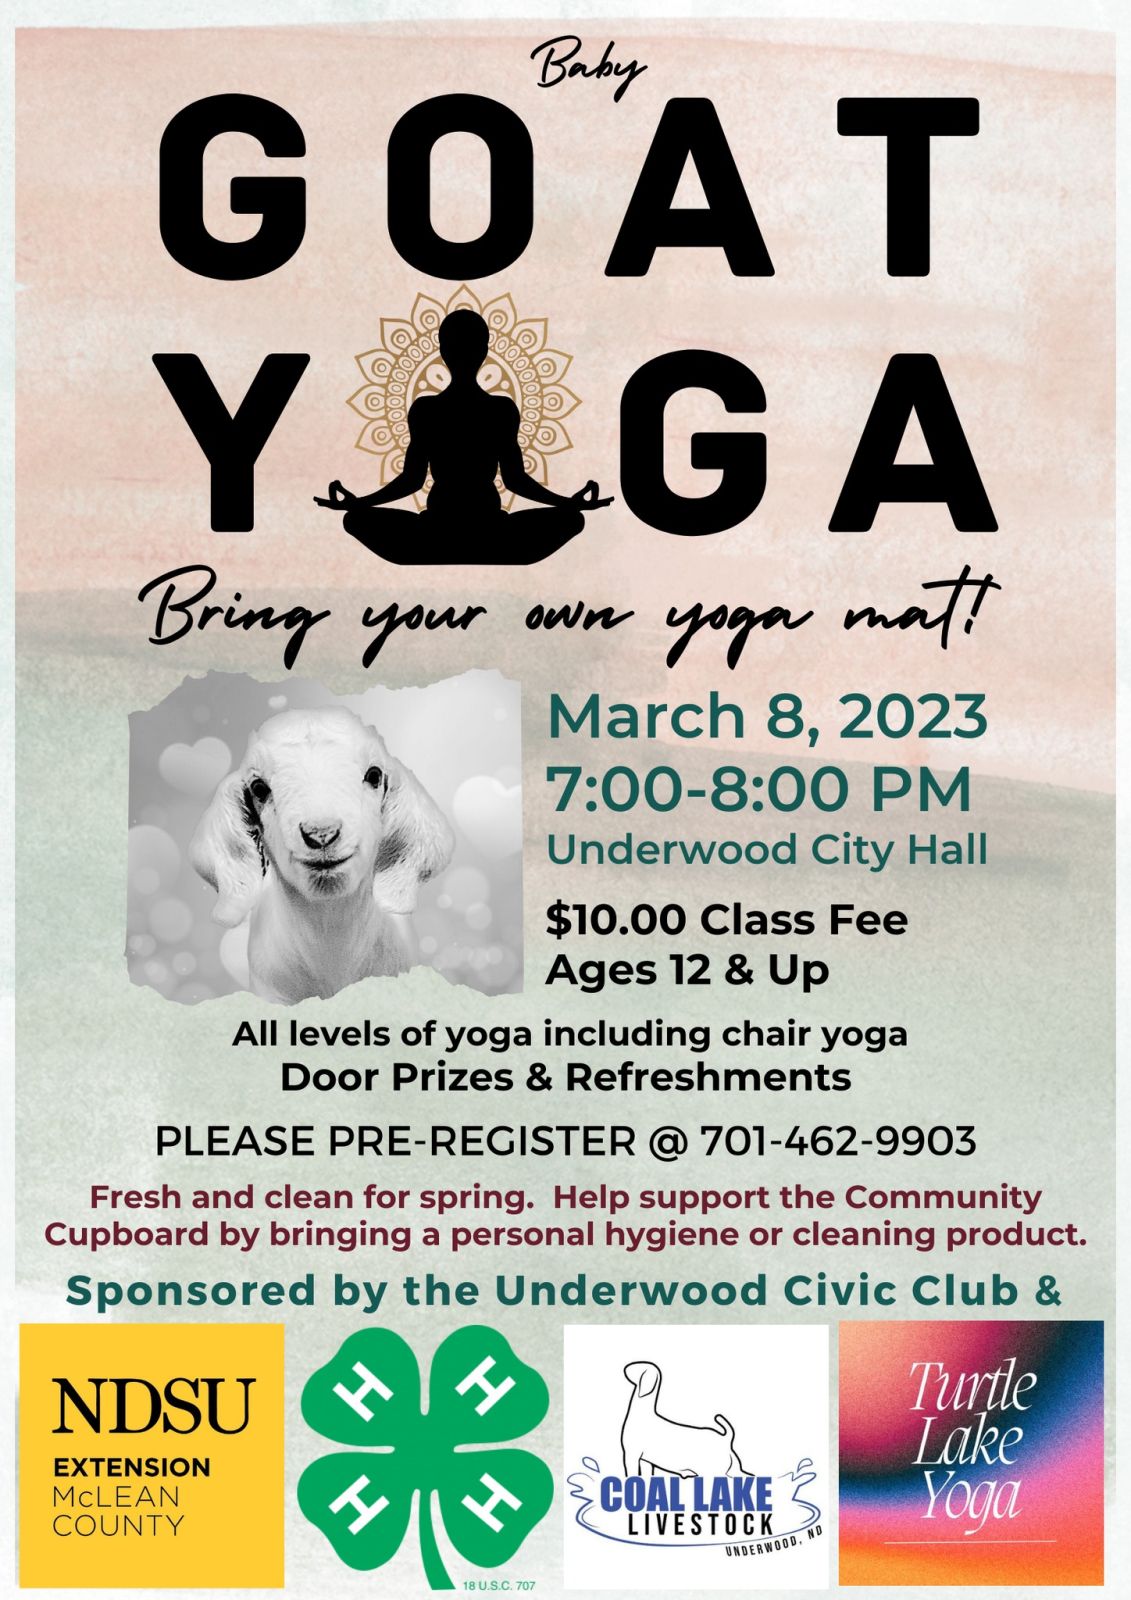 Event Promo Photo For Baby Goat Yoga